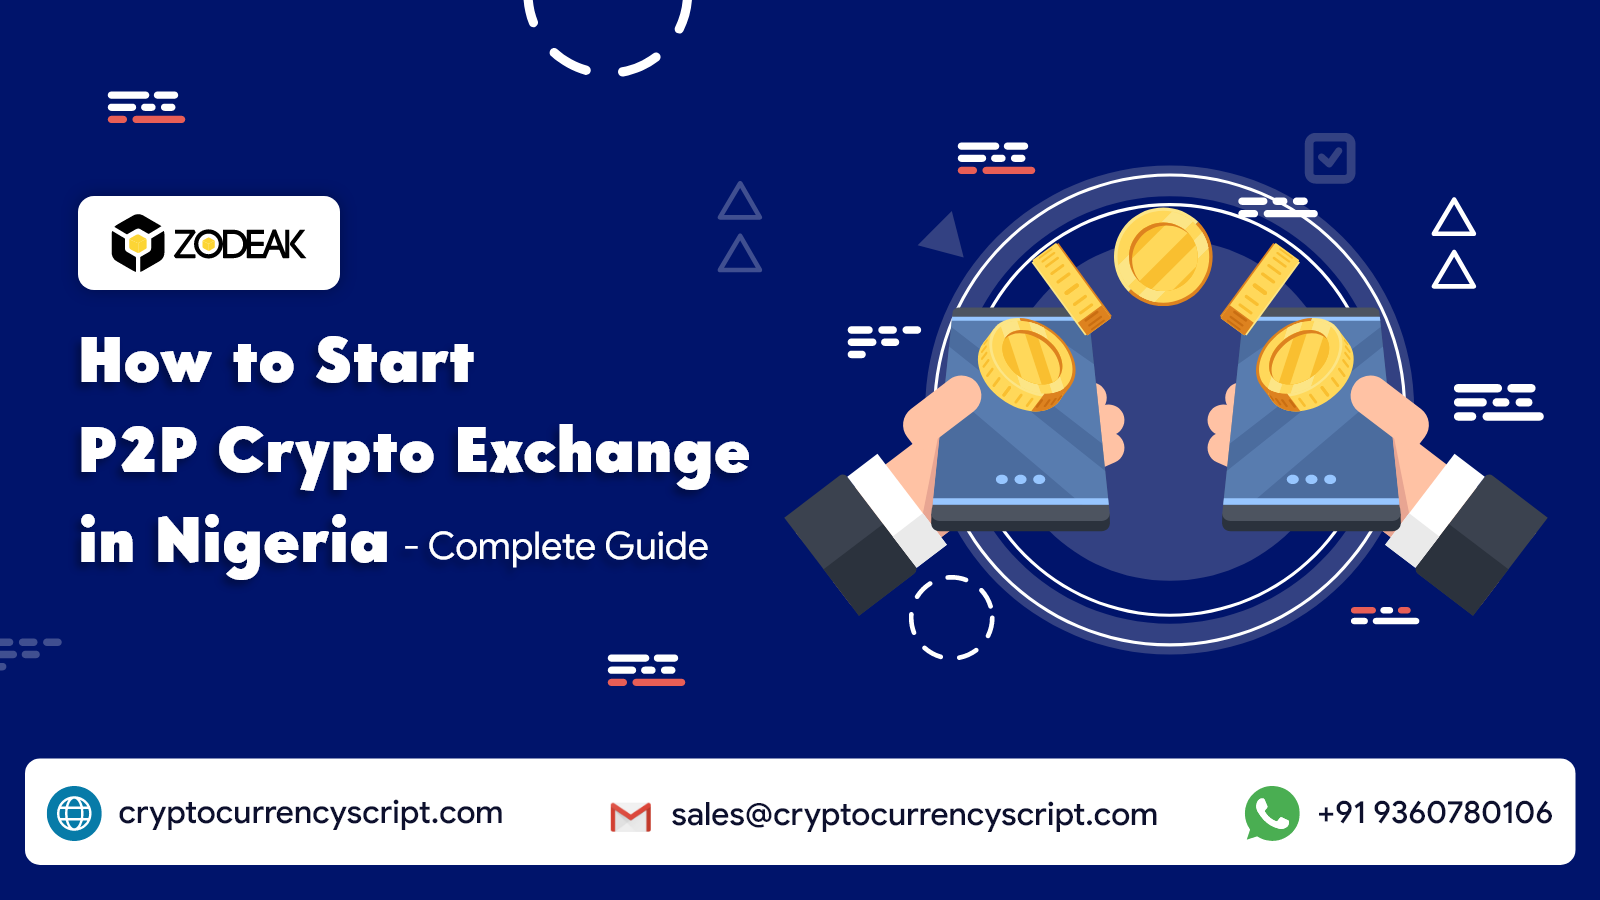 How to Start P2P Crypto Exchange in Nigeria - Complete Guide